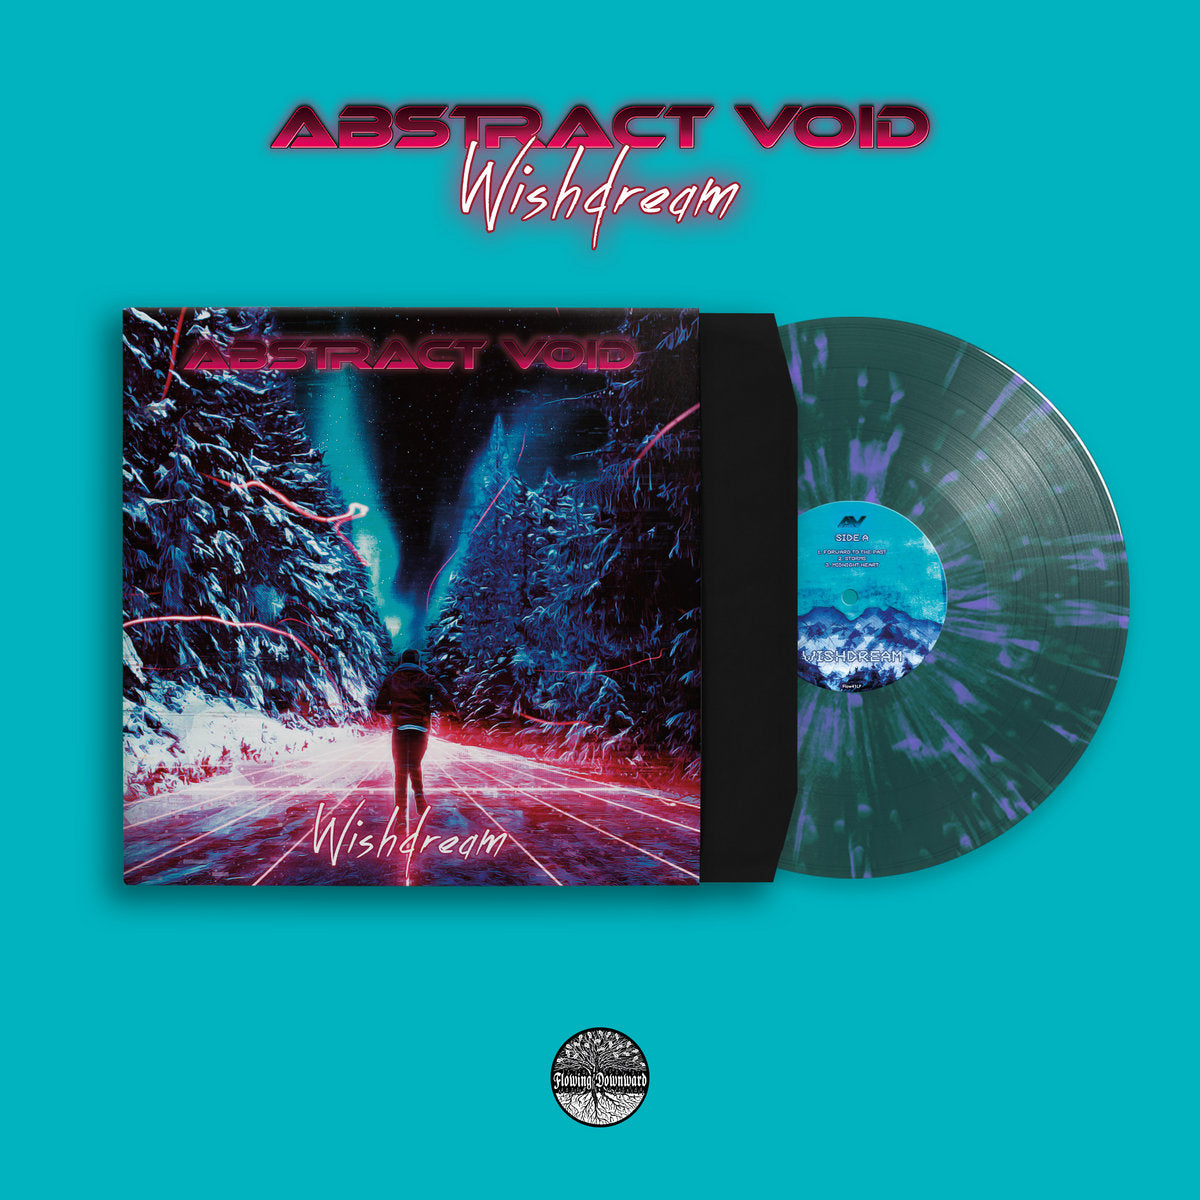 [SOLD OUT] ABSTRACT VOID "Wishdream" vinyl LP (color)